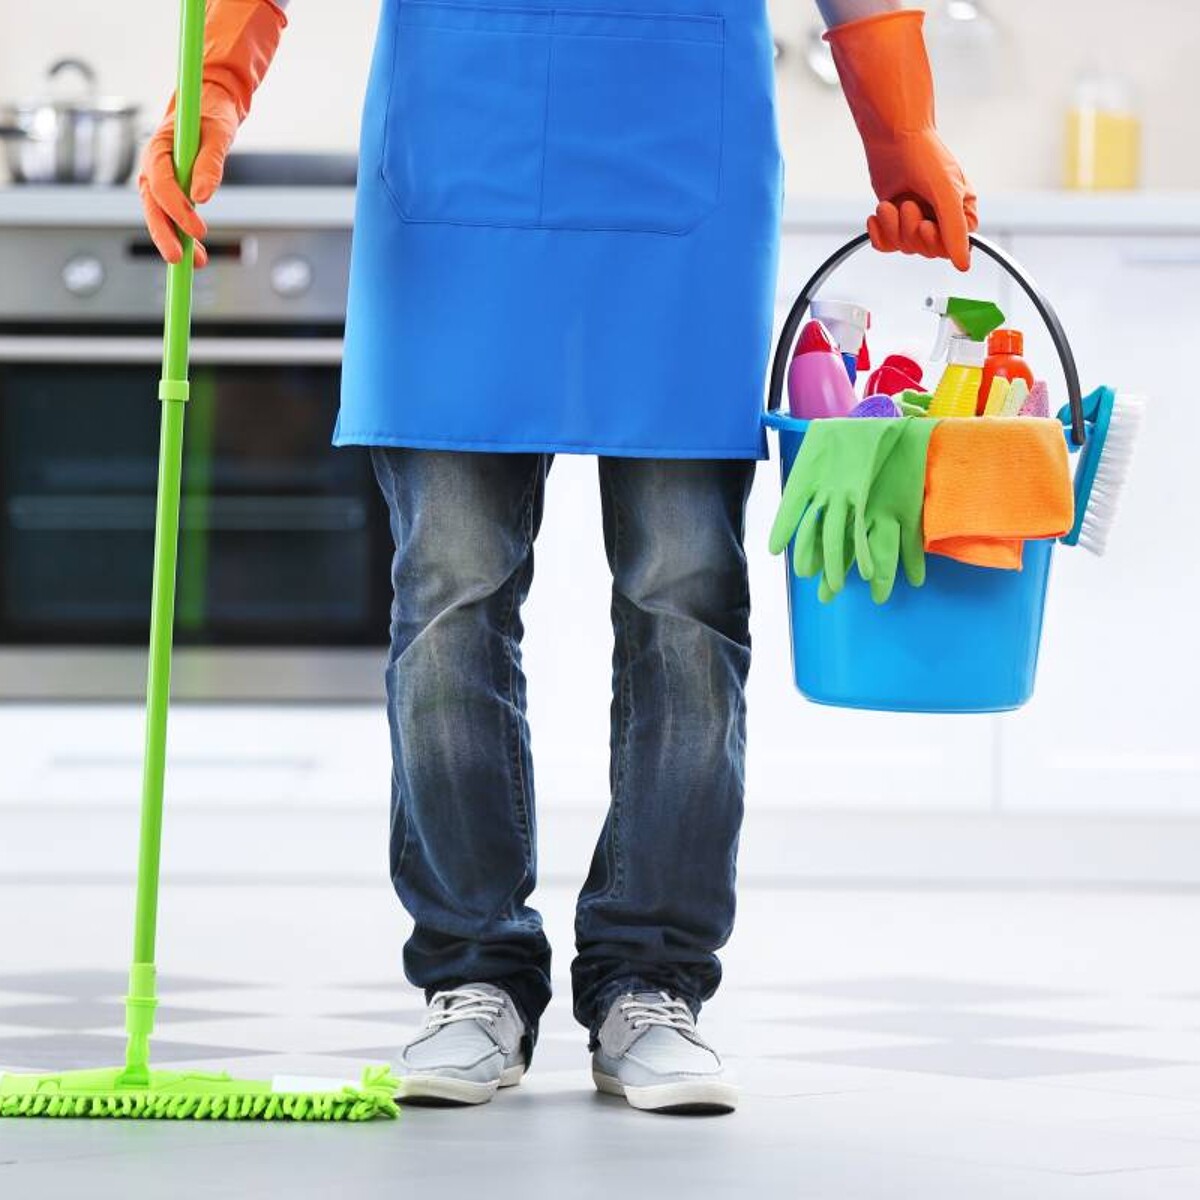 https://images.airtasker.com/v7/https://airtasker-seo-assets-prod.s3.amazonaws.com/en_US/1672130778273_how-much-does-house-cleaning-cost.jpg?gravity=smart&w=1200&h=1200